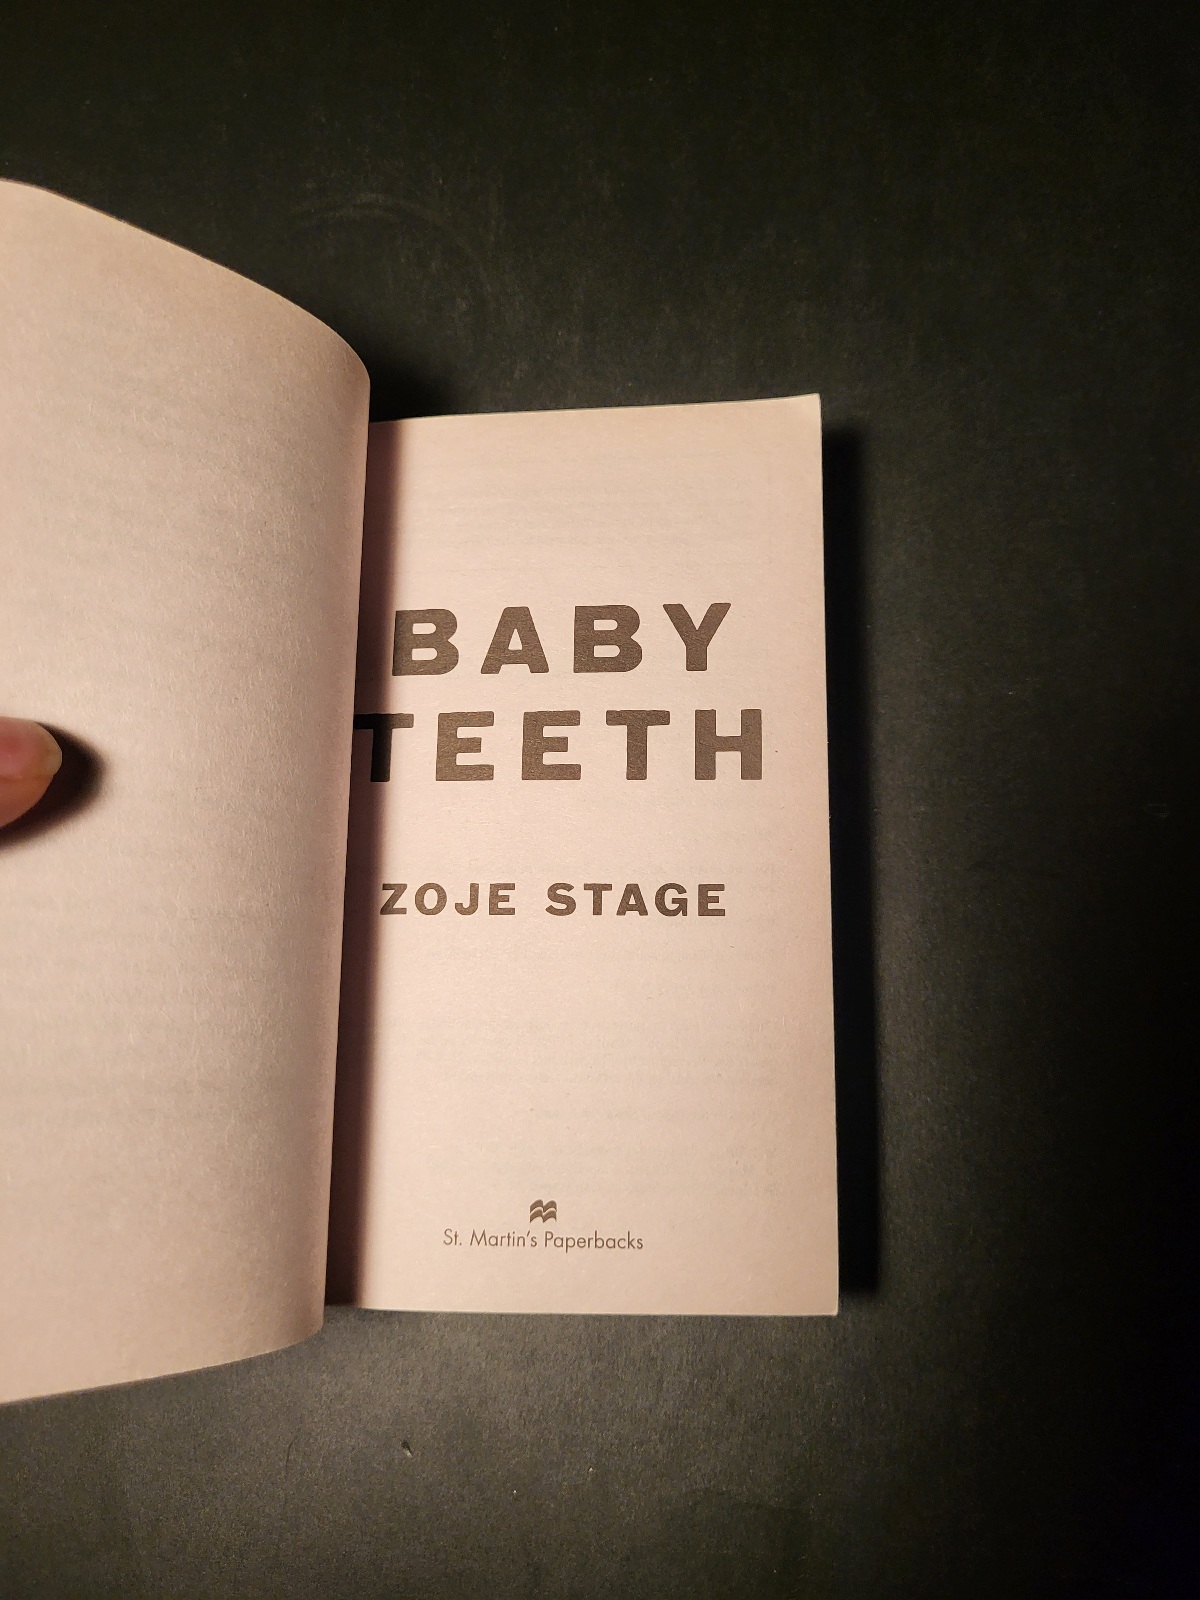 Baby Teeth by Zoje Stage Horror St. Martin’s Paperback 2020